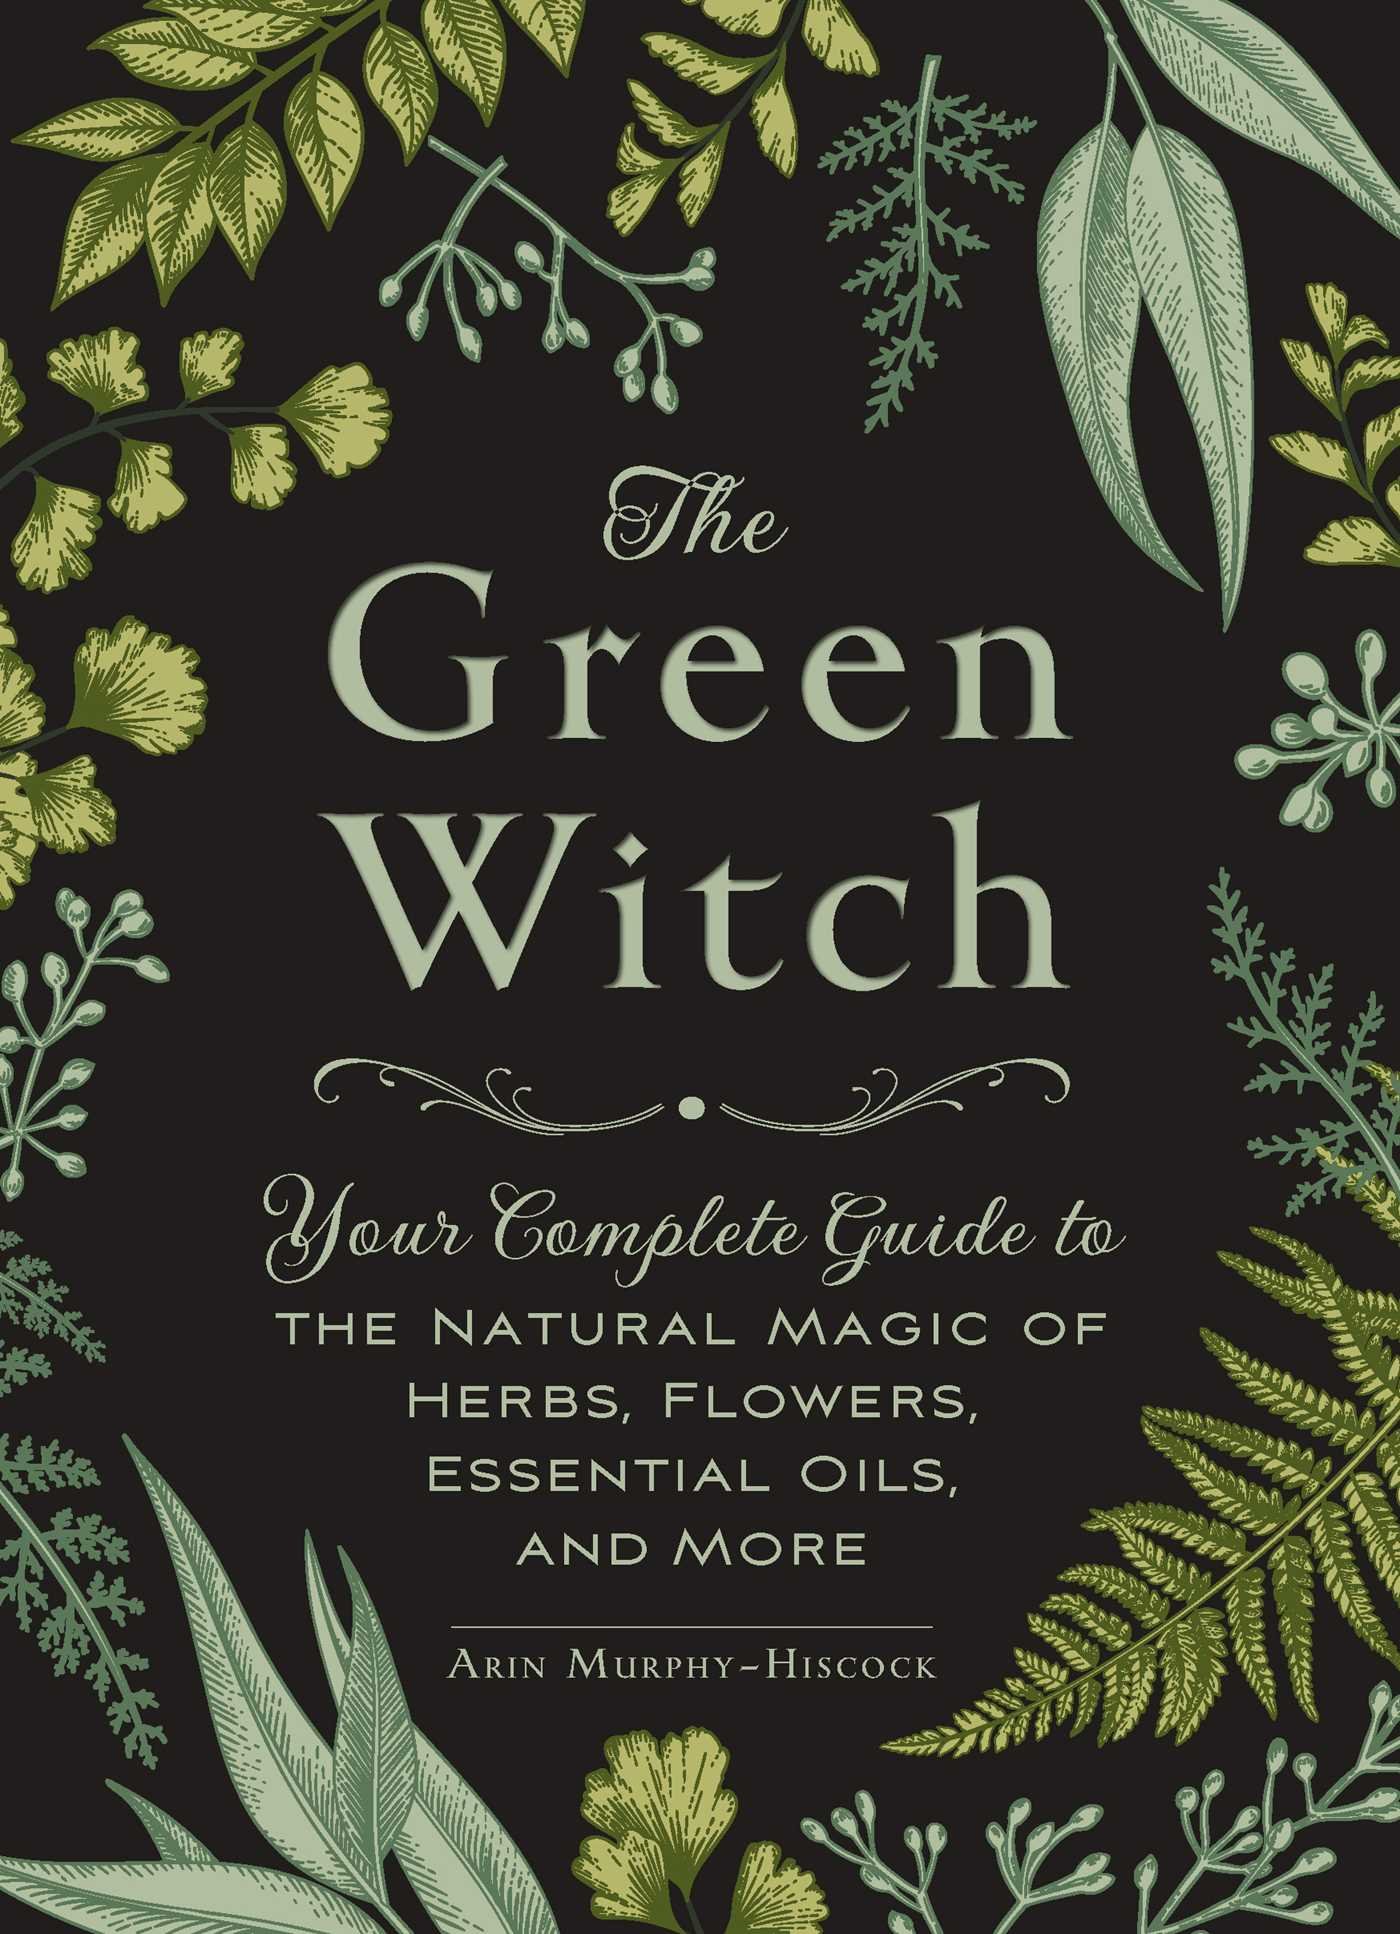 The Green Witch : Your Complete Guide to the Natural Magic of Herbs, Flowers, Essential Oils, and More [Hardcover]